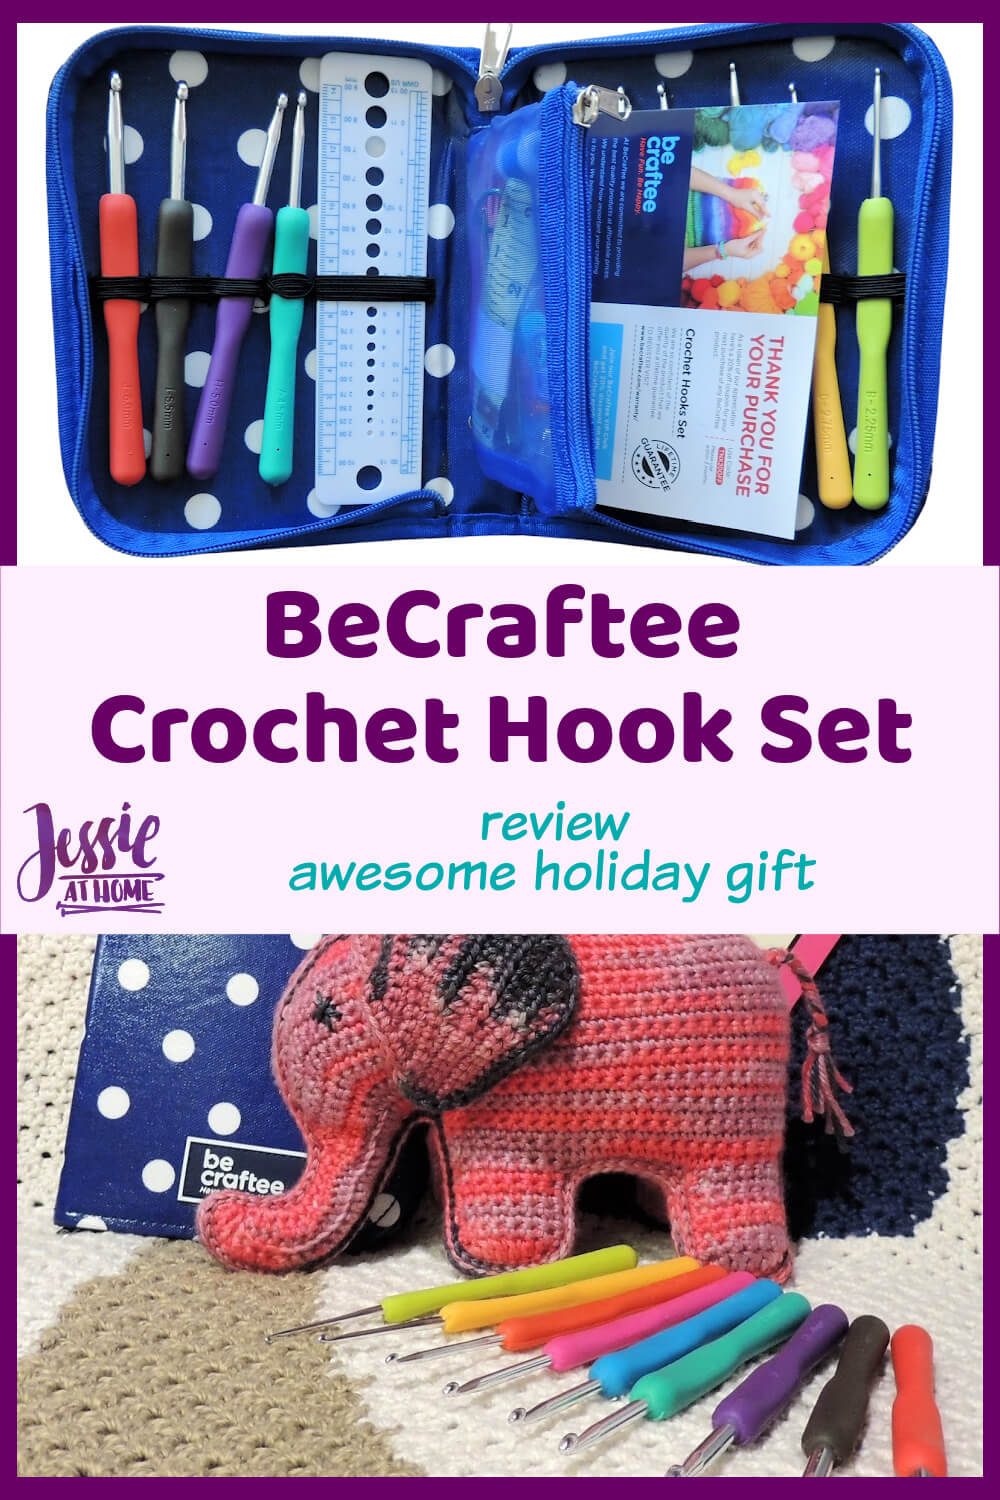 BeCraftee Crochet Hook Set - Awesome Holiday Gift!